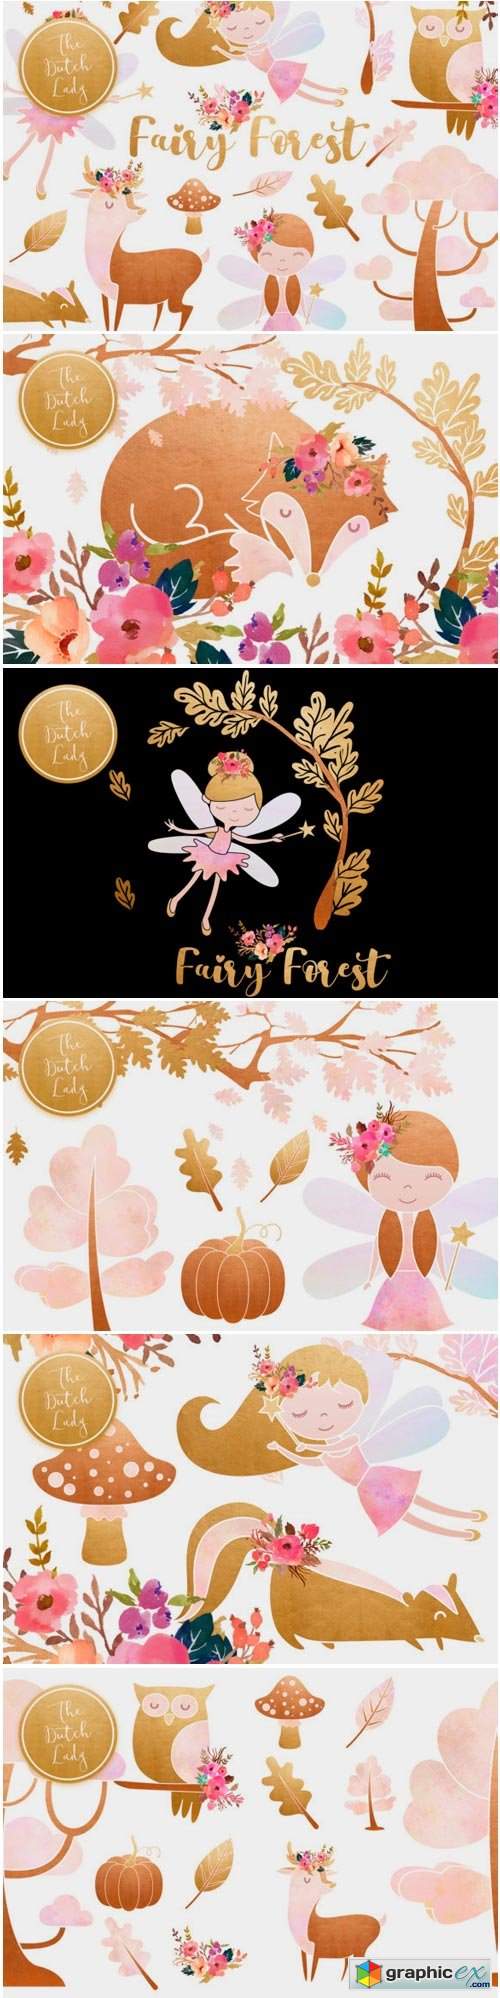 Enchanted Fairy Forest Clipart Set